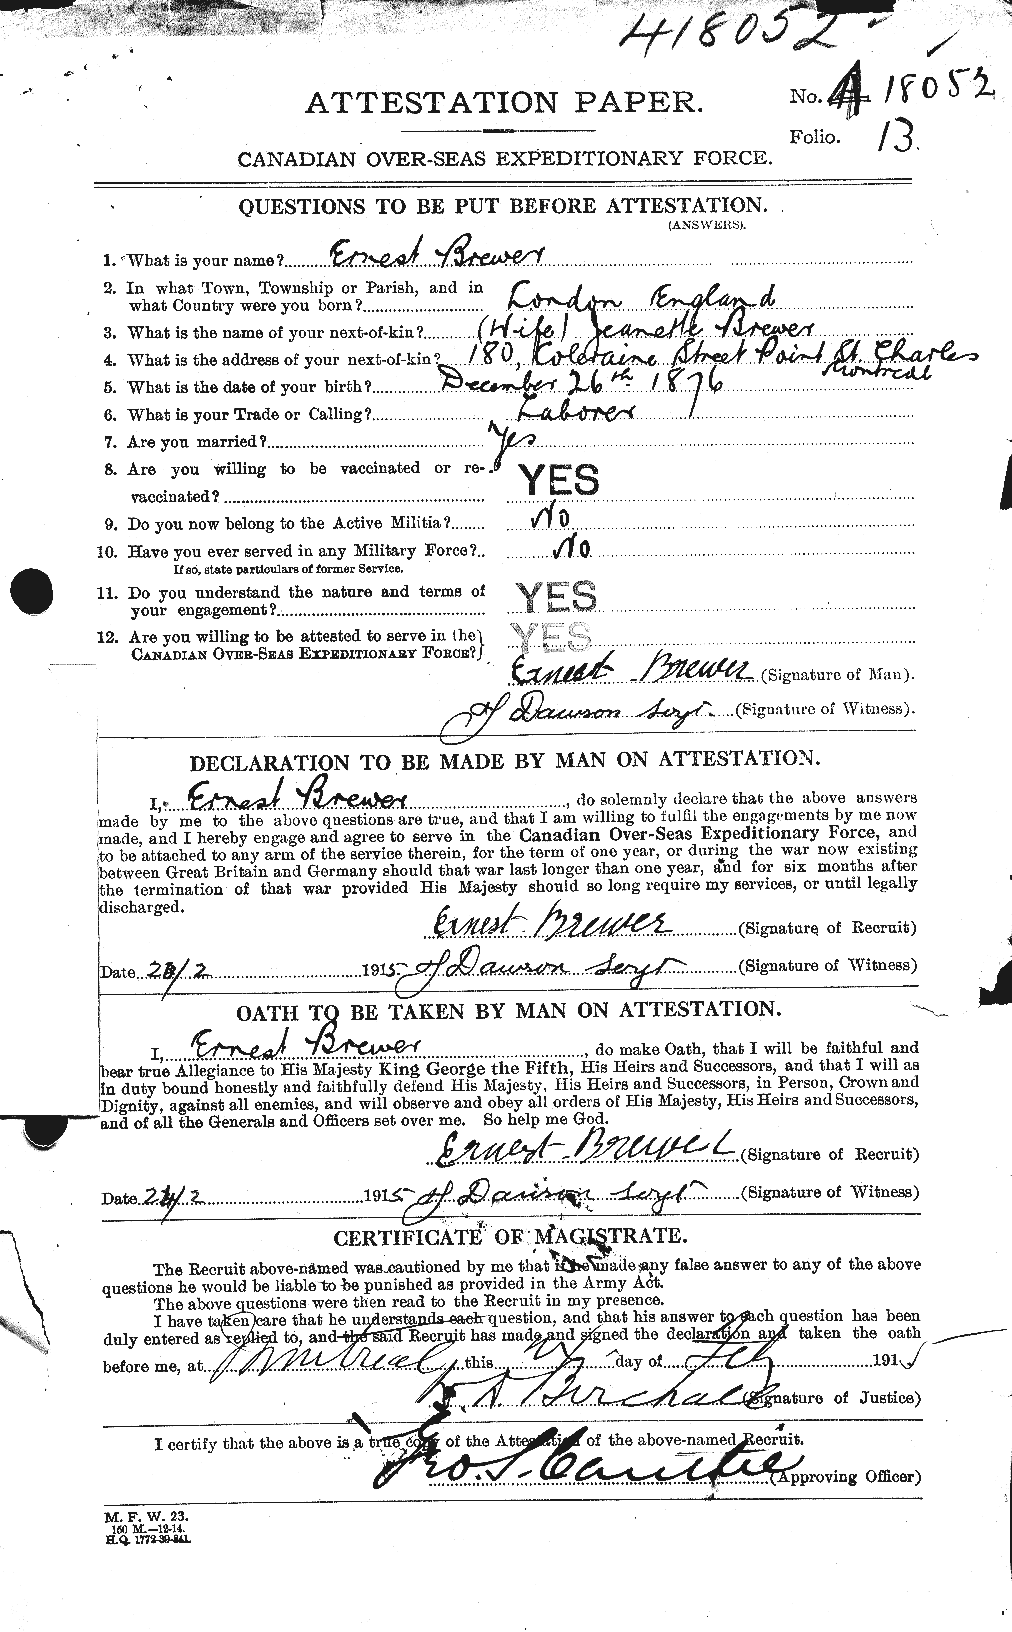 Personnel Records of the First World War - CEF 258946a